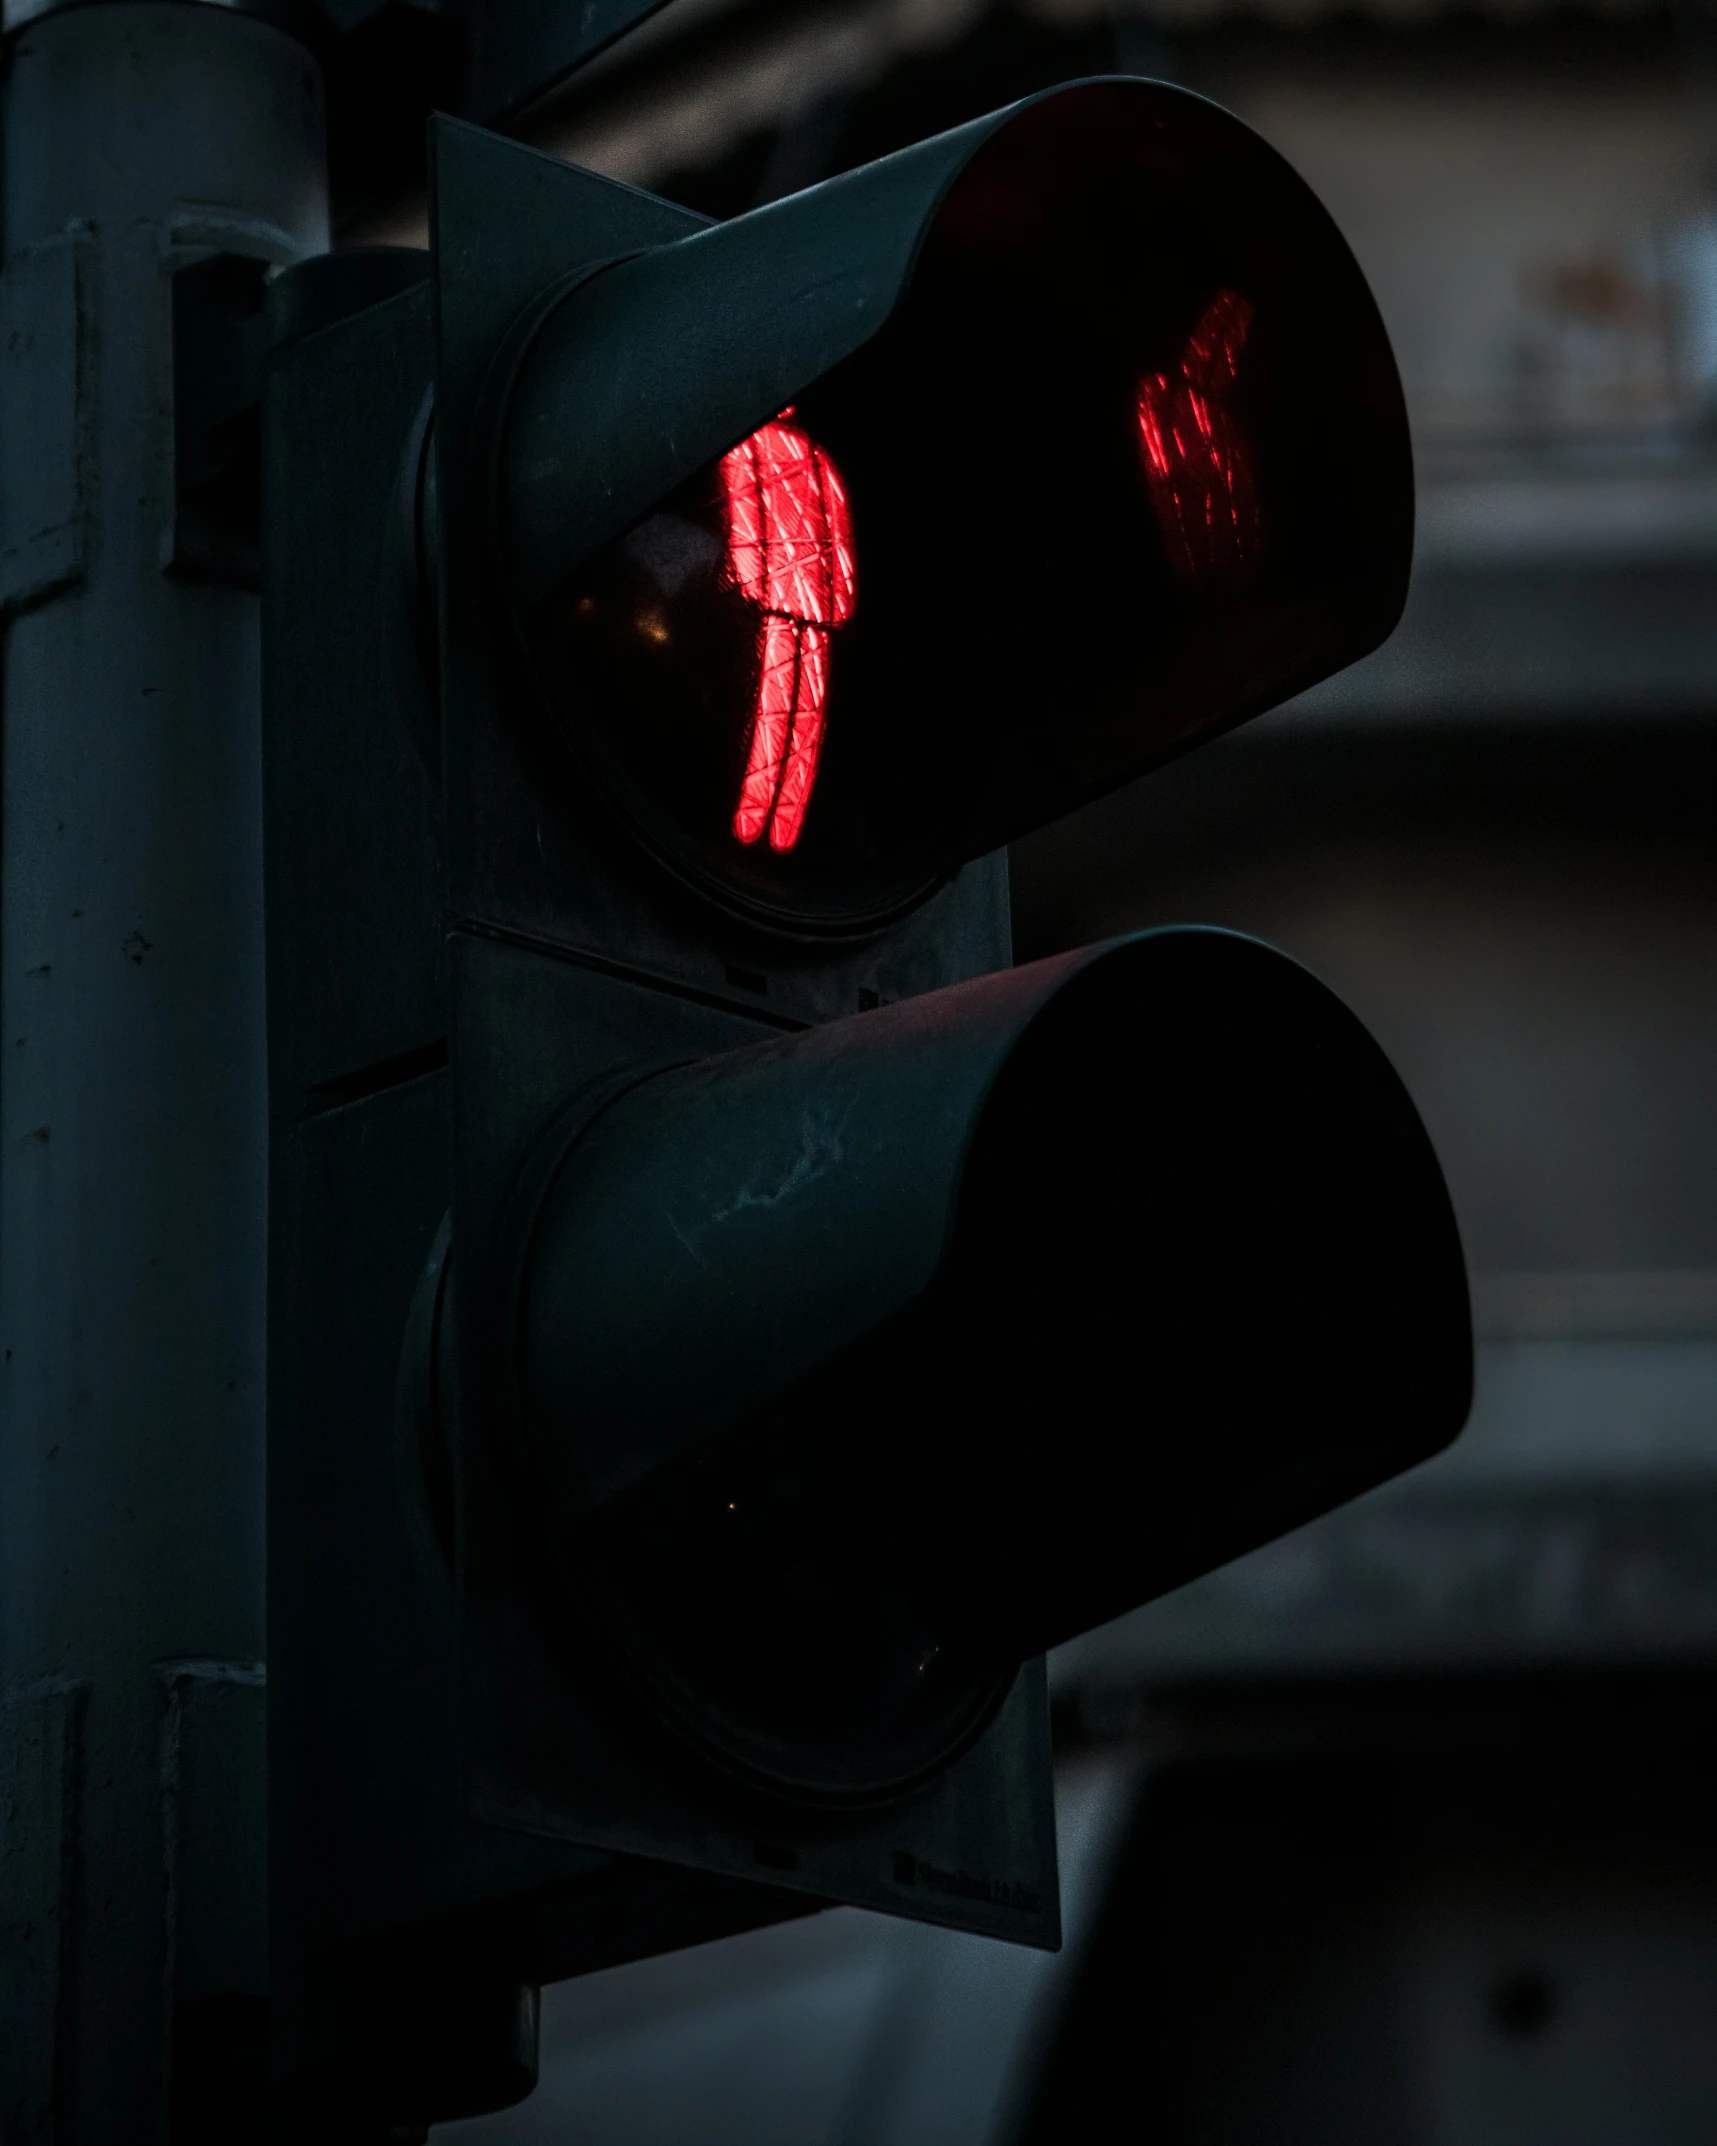 a traffic light shows red as it is glowing red